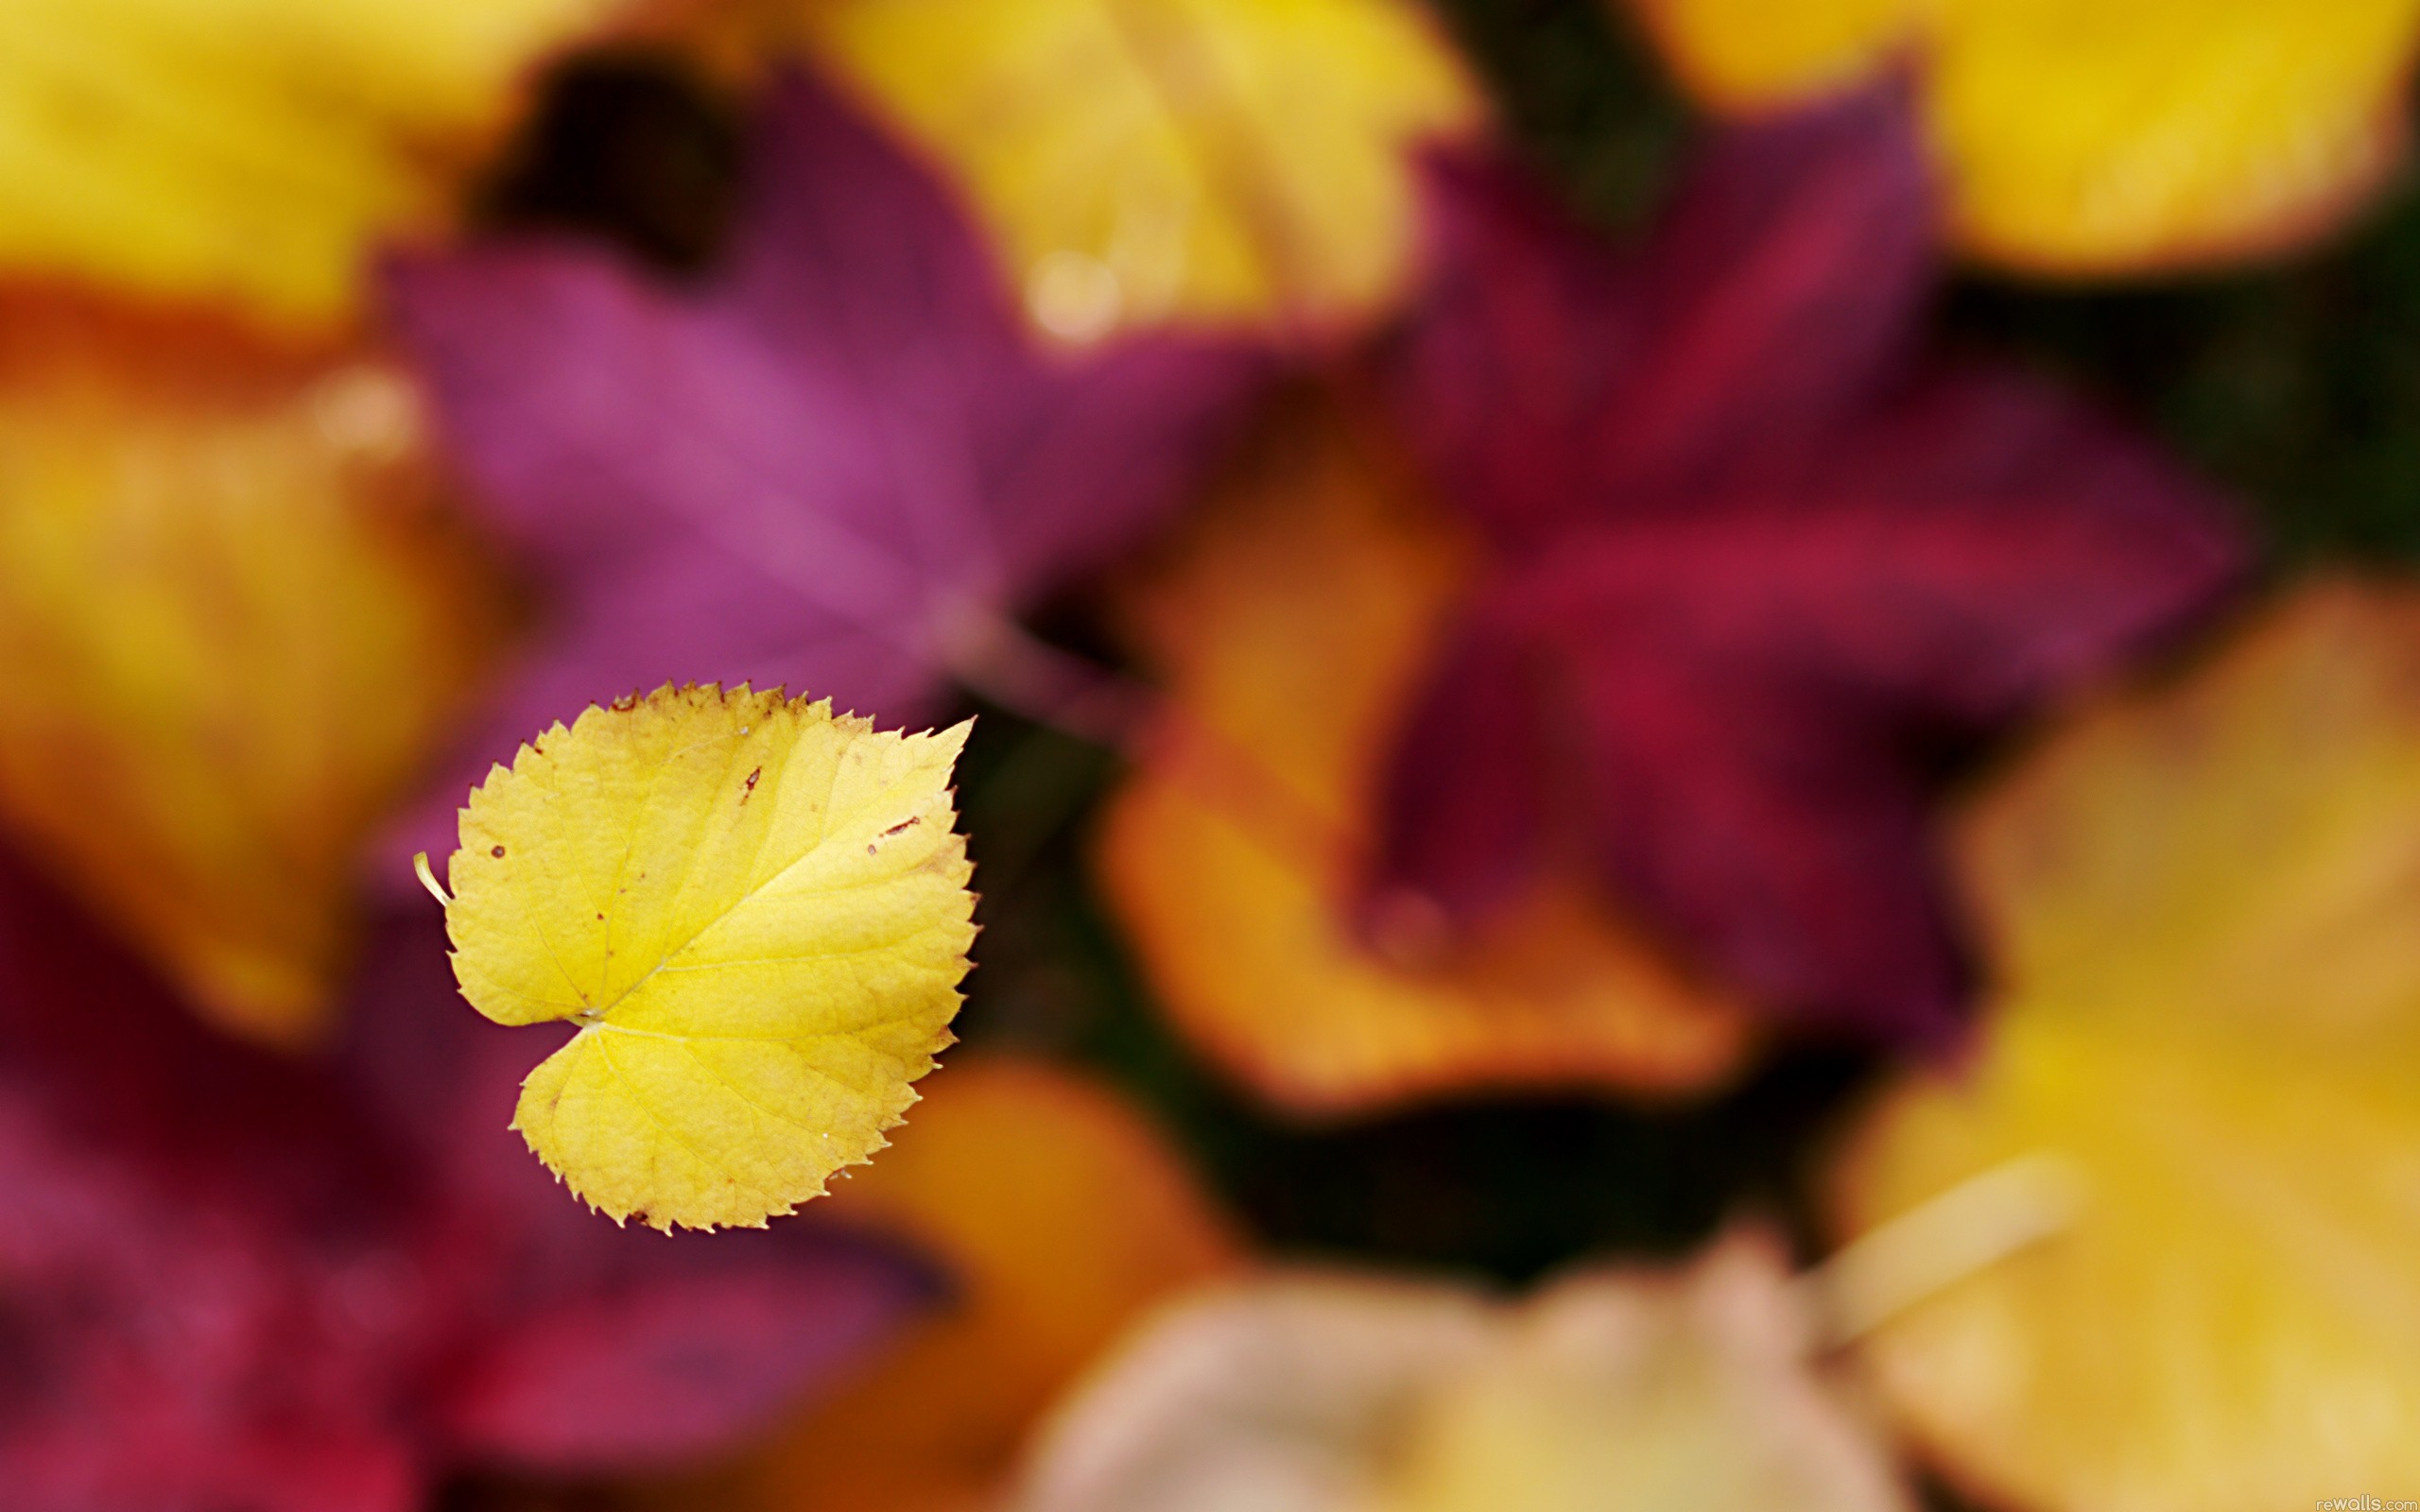 General 2560x1600 plants fall leaves fallen leaves vibrant yellow depth of field macro nature